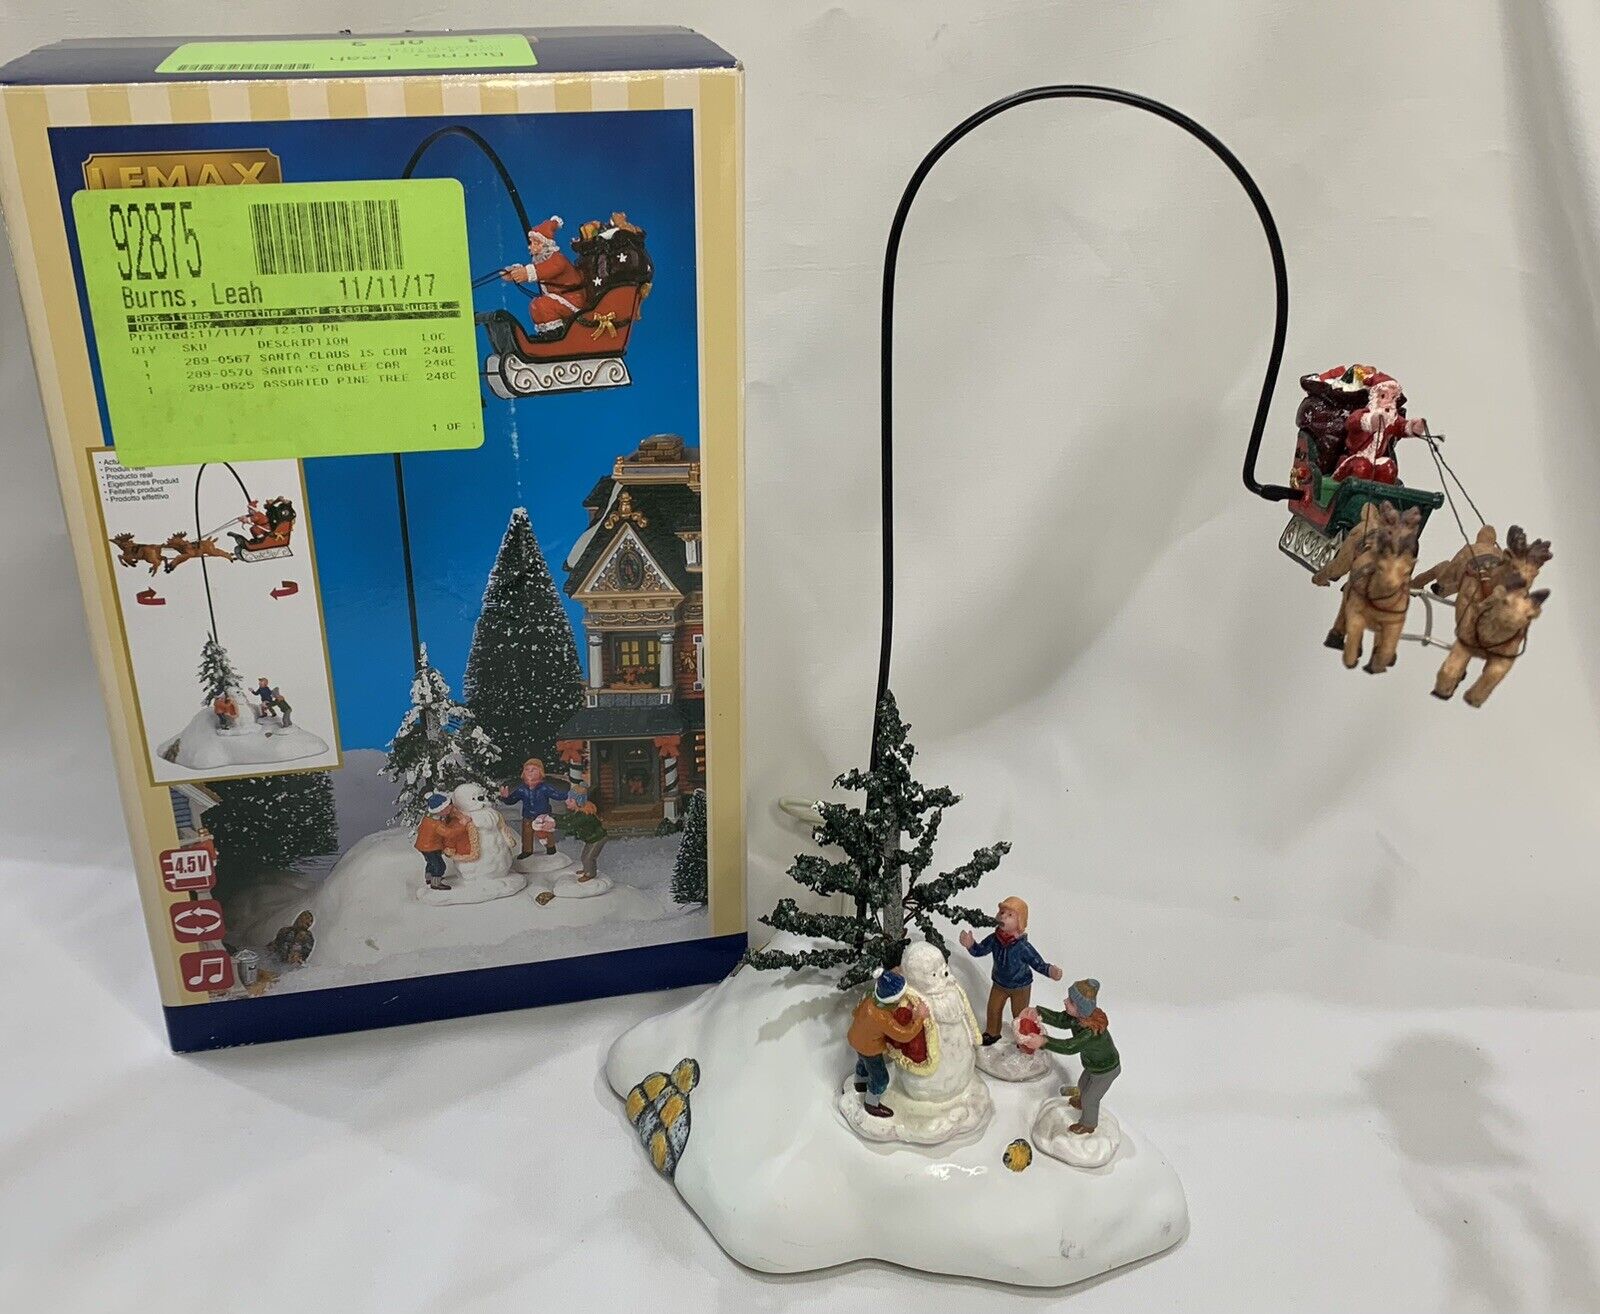 LEMAX SANTA CLAUS IS COMING TO TOWN Christmas Village PLAYS MUSIC & ROTATES ‘05